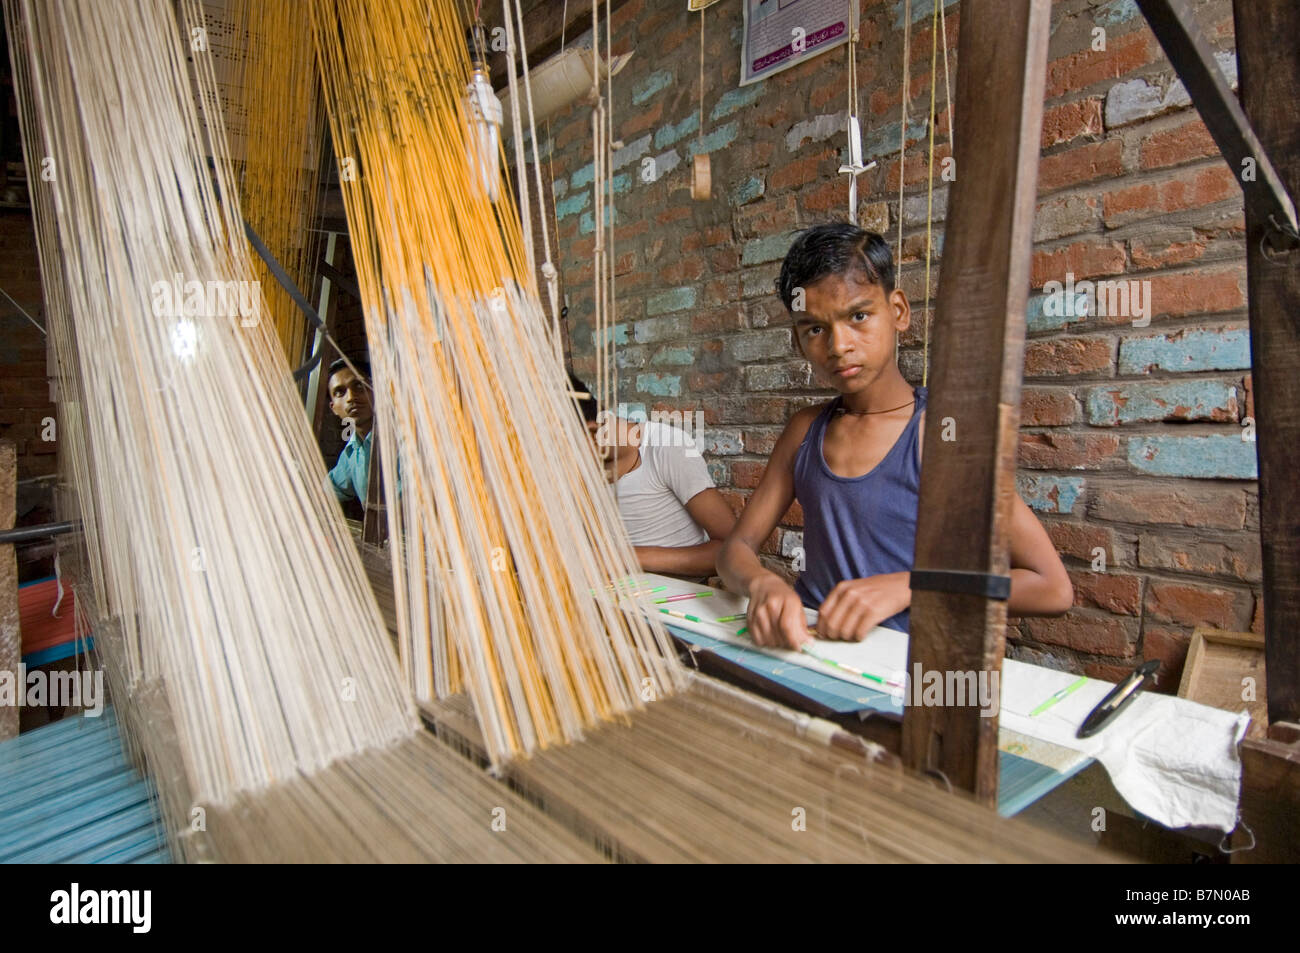 Child labour in the small textile factories of Varanasi - a young boy working for a pittance making silk saris on a loom. Stock Photo